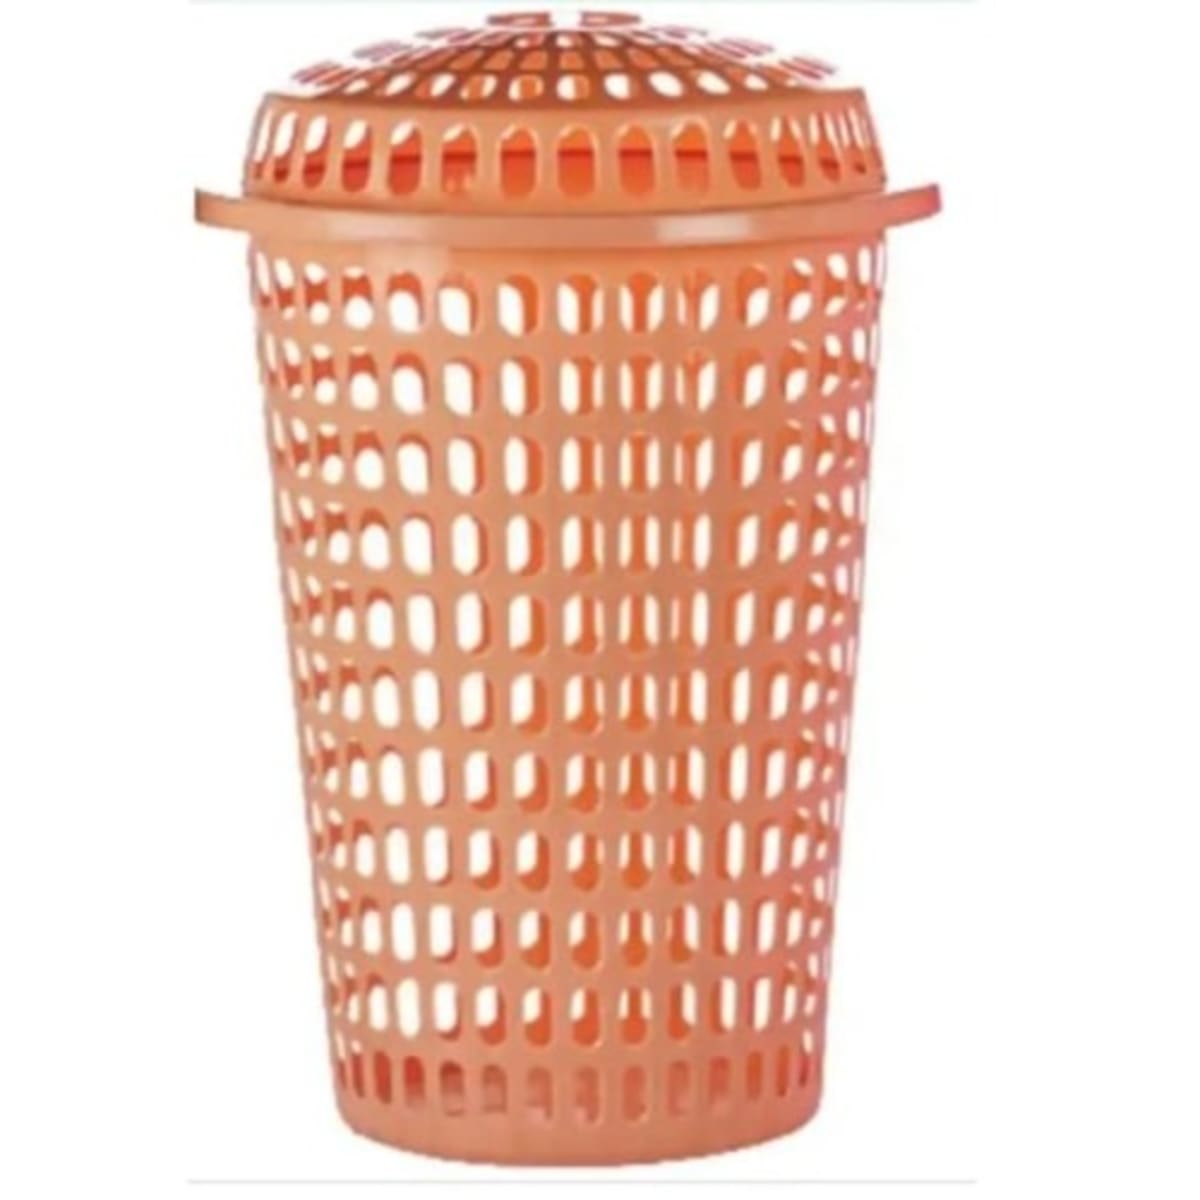 Laundry Basket For Clothes